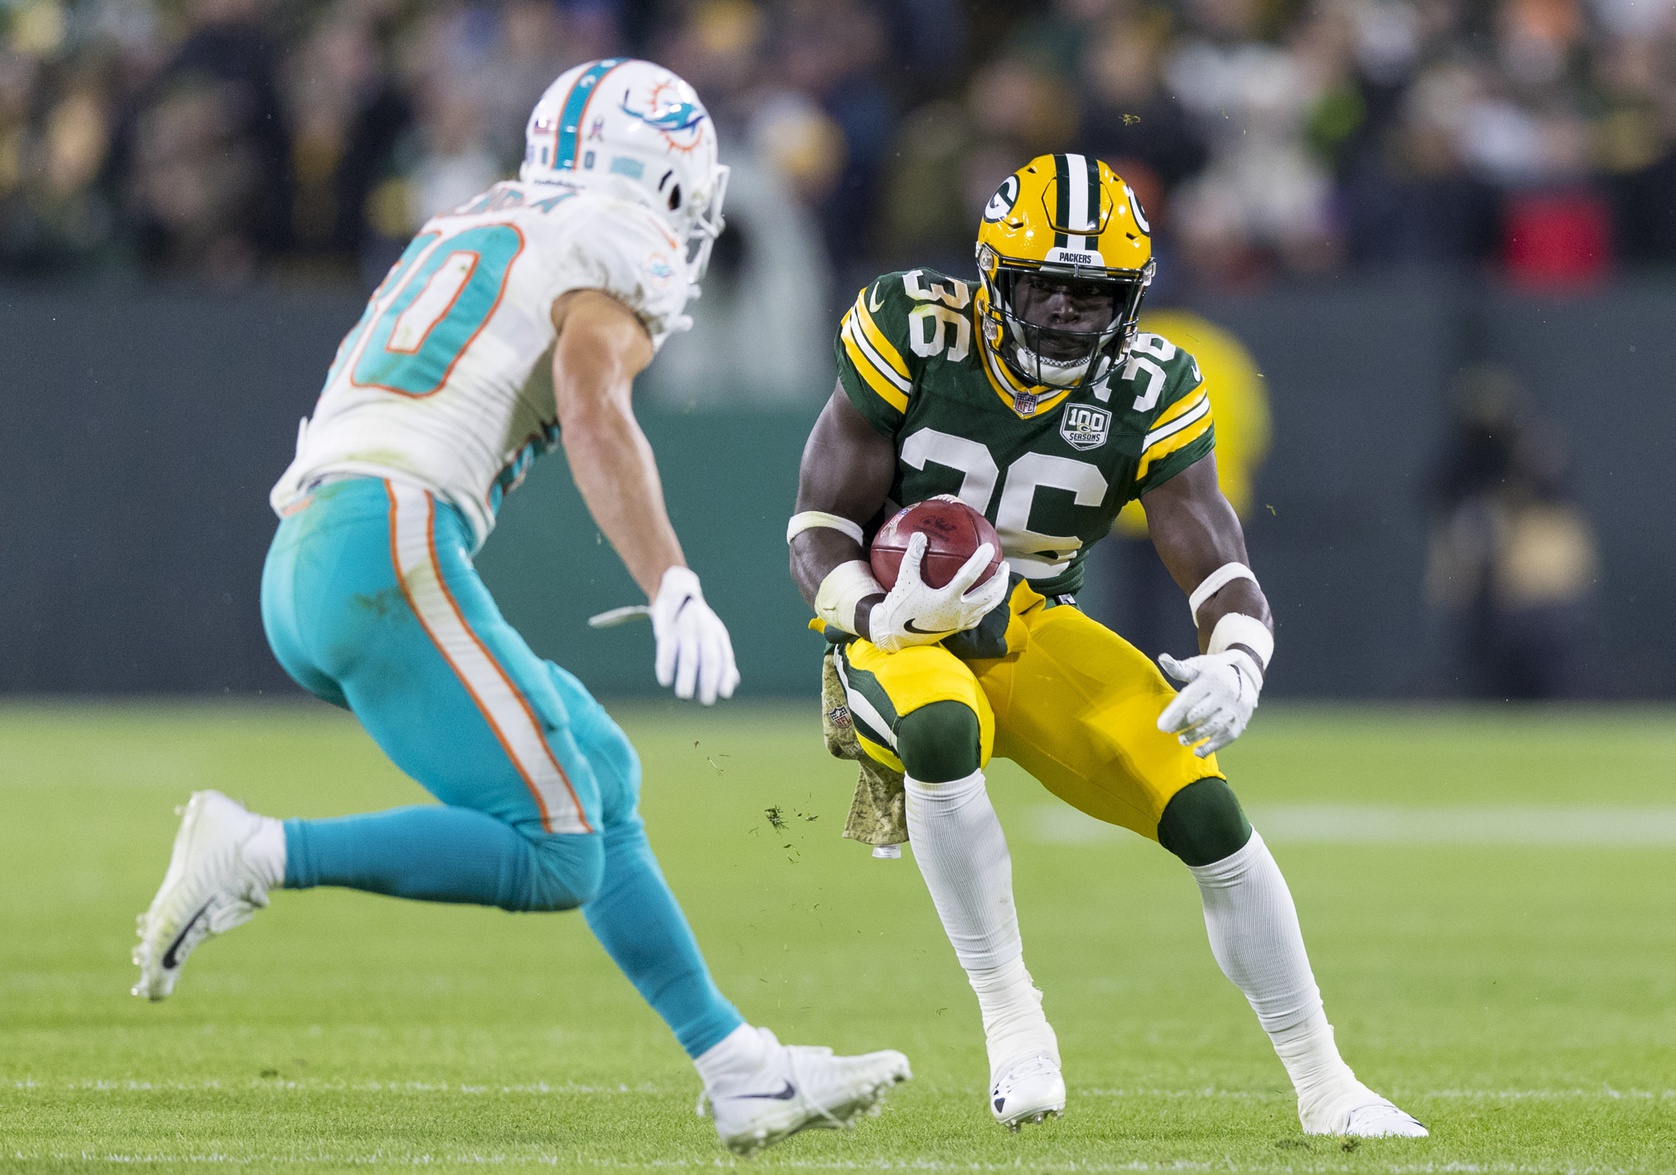 Packers 26 Dolphins 20: Game Balls & Lame Calls